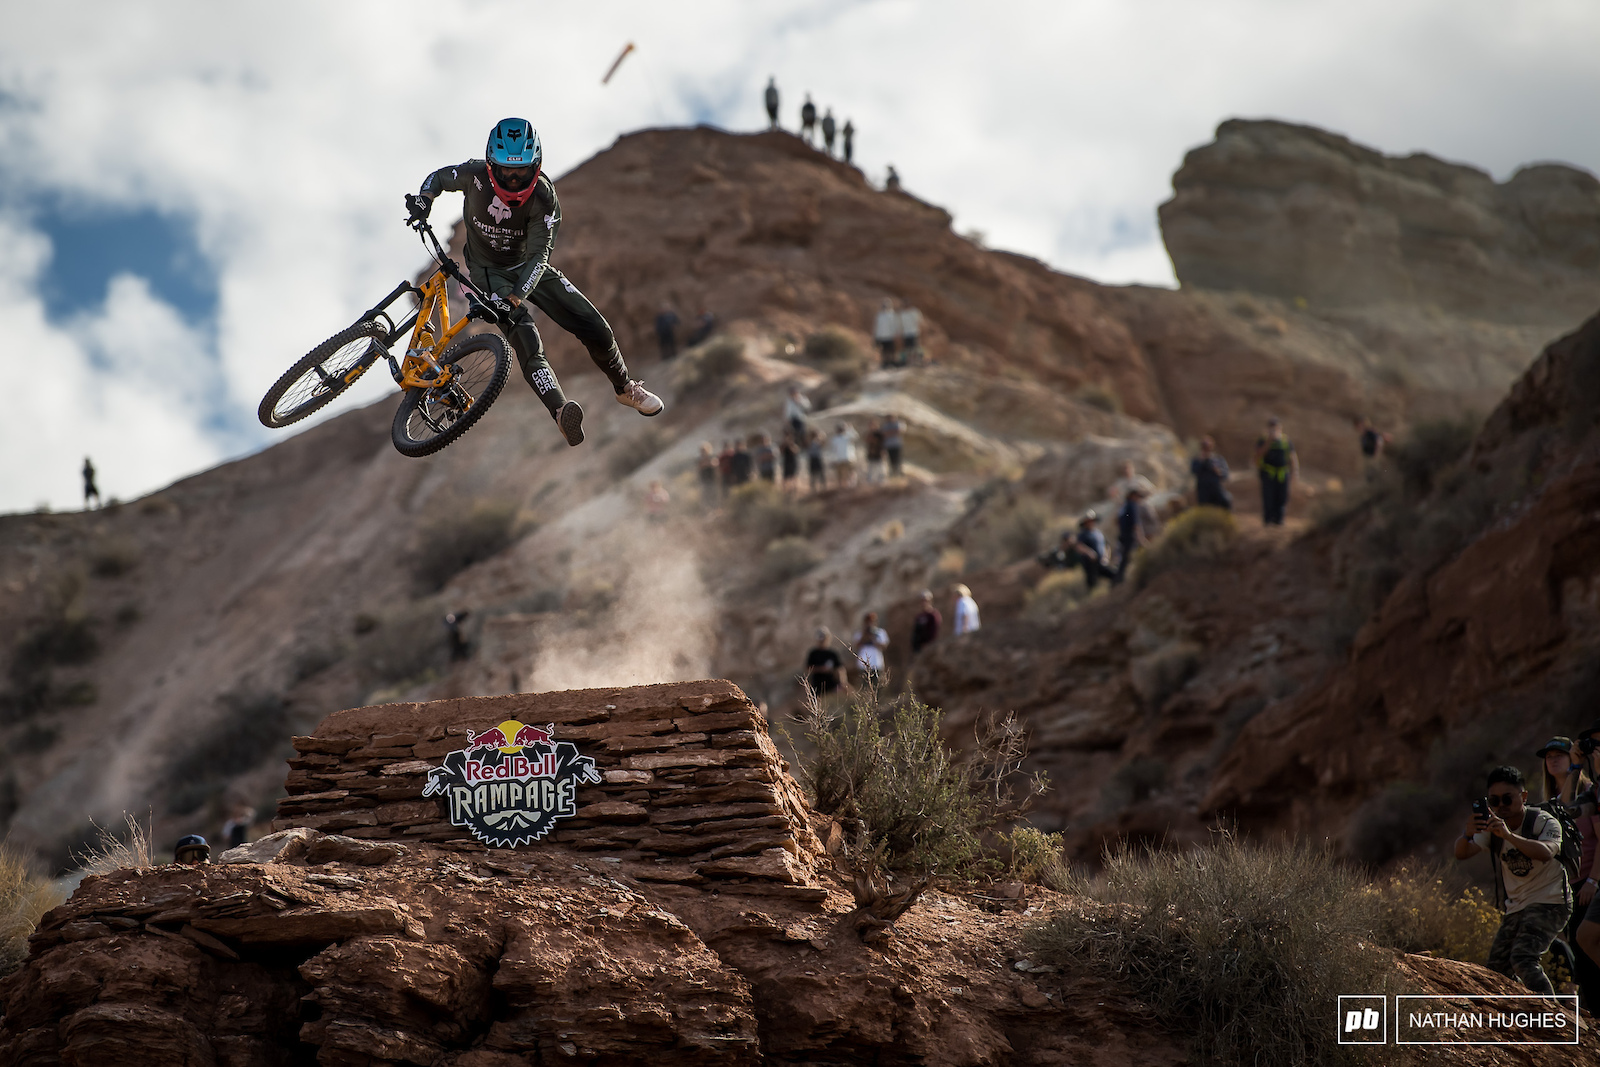 And then there were 3. Single crowns are here again and winning Redbull Rampage back to back.